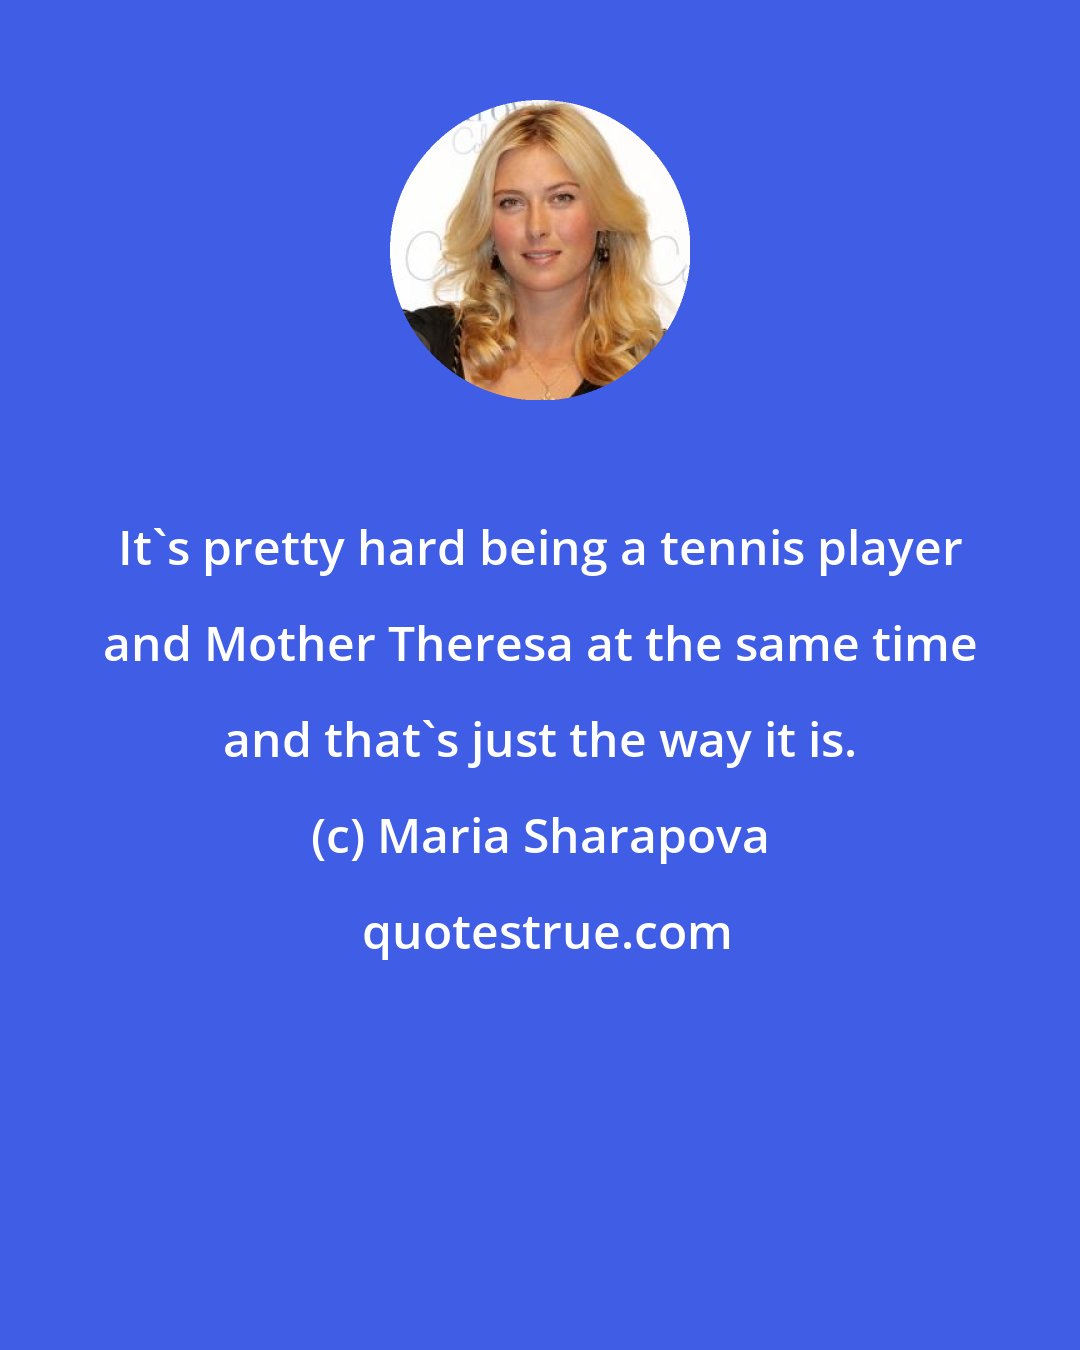 Maria Sharapova: It's pretty hard being a tennis player and Mother Theresa at the same time and that's just the way it is.